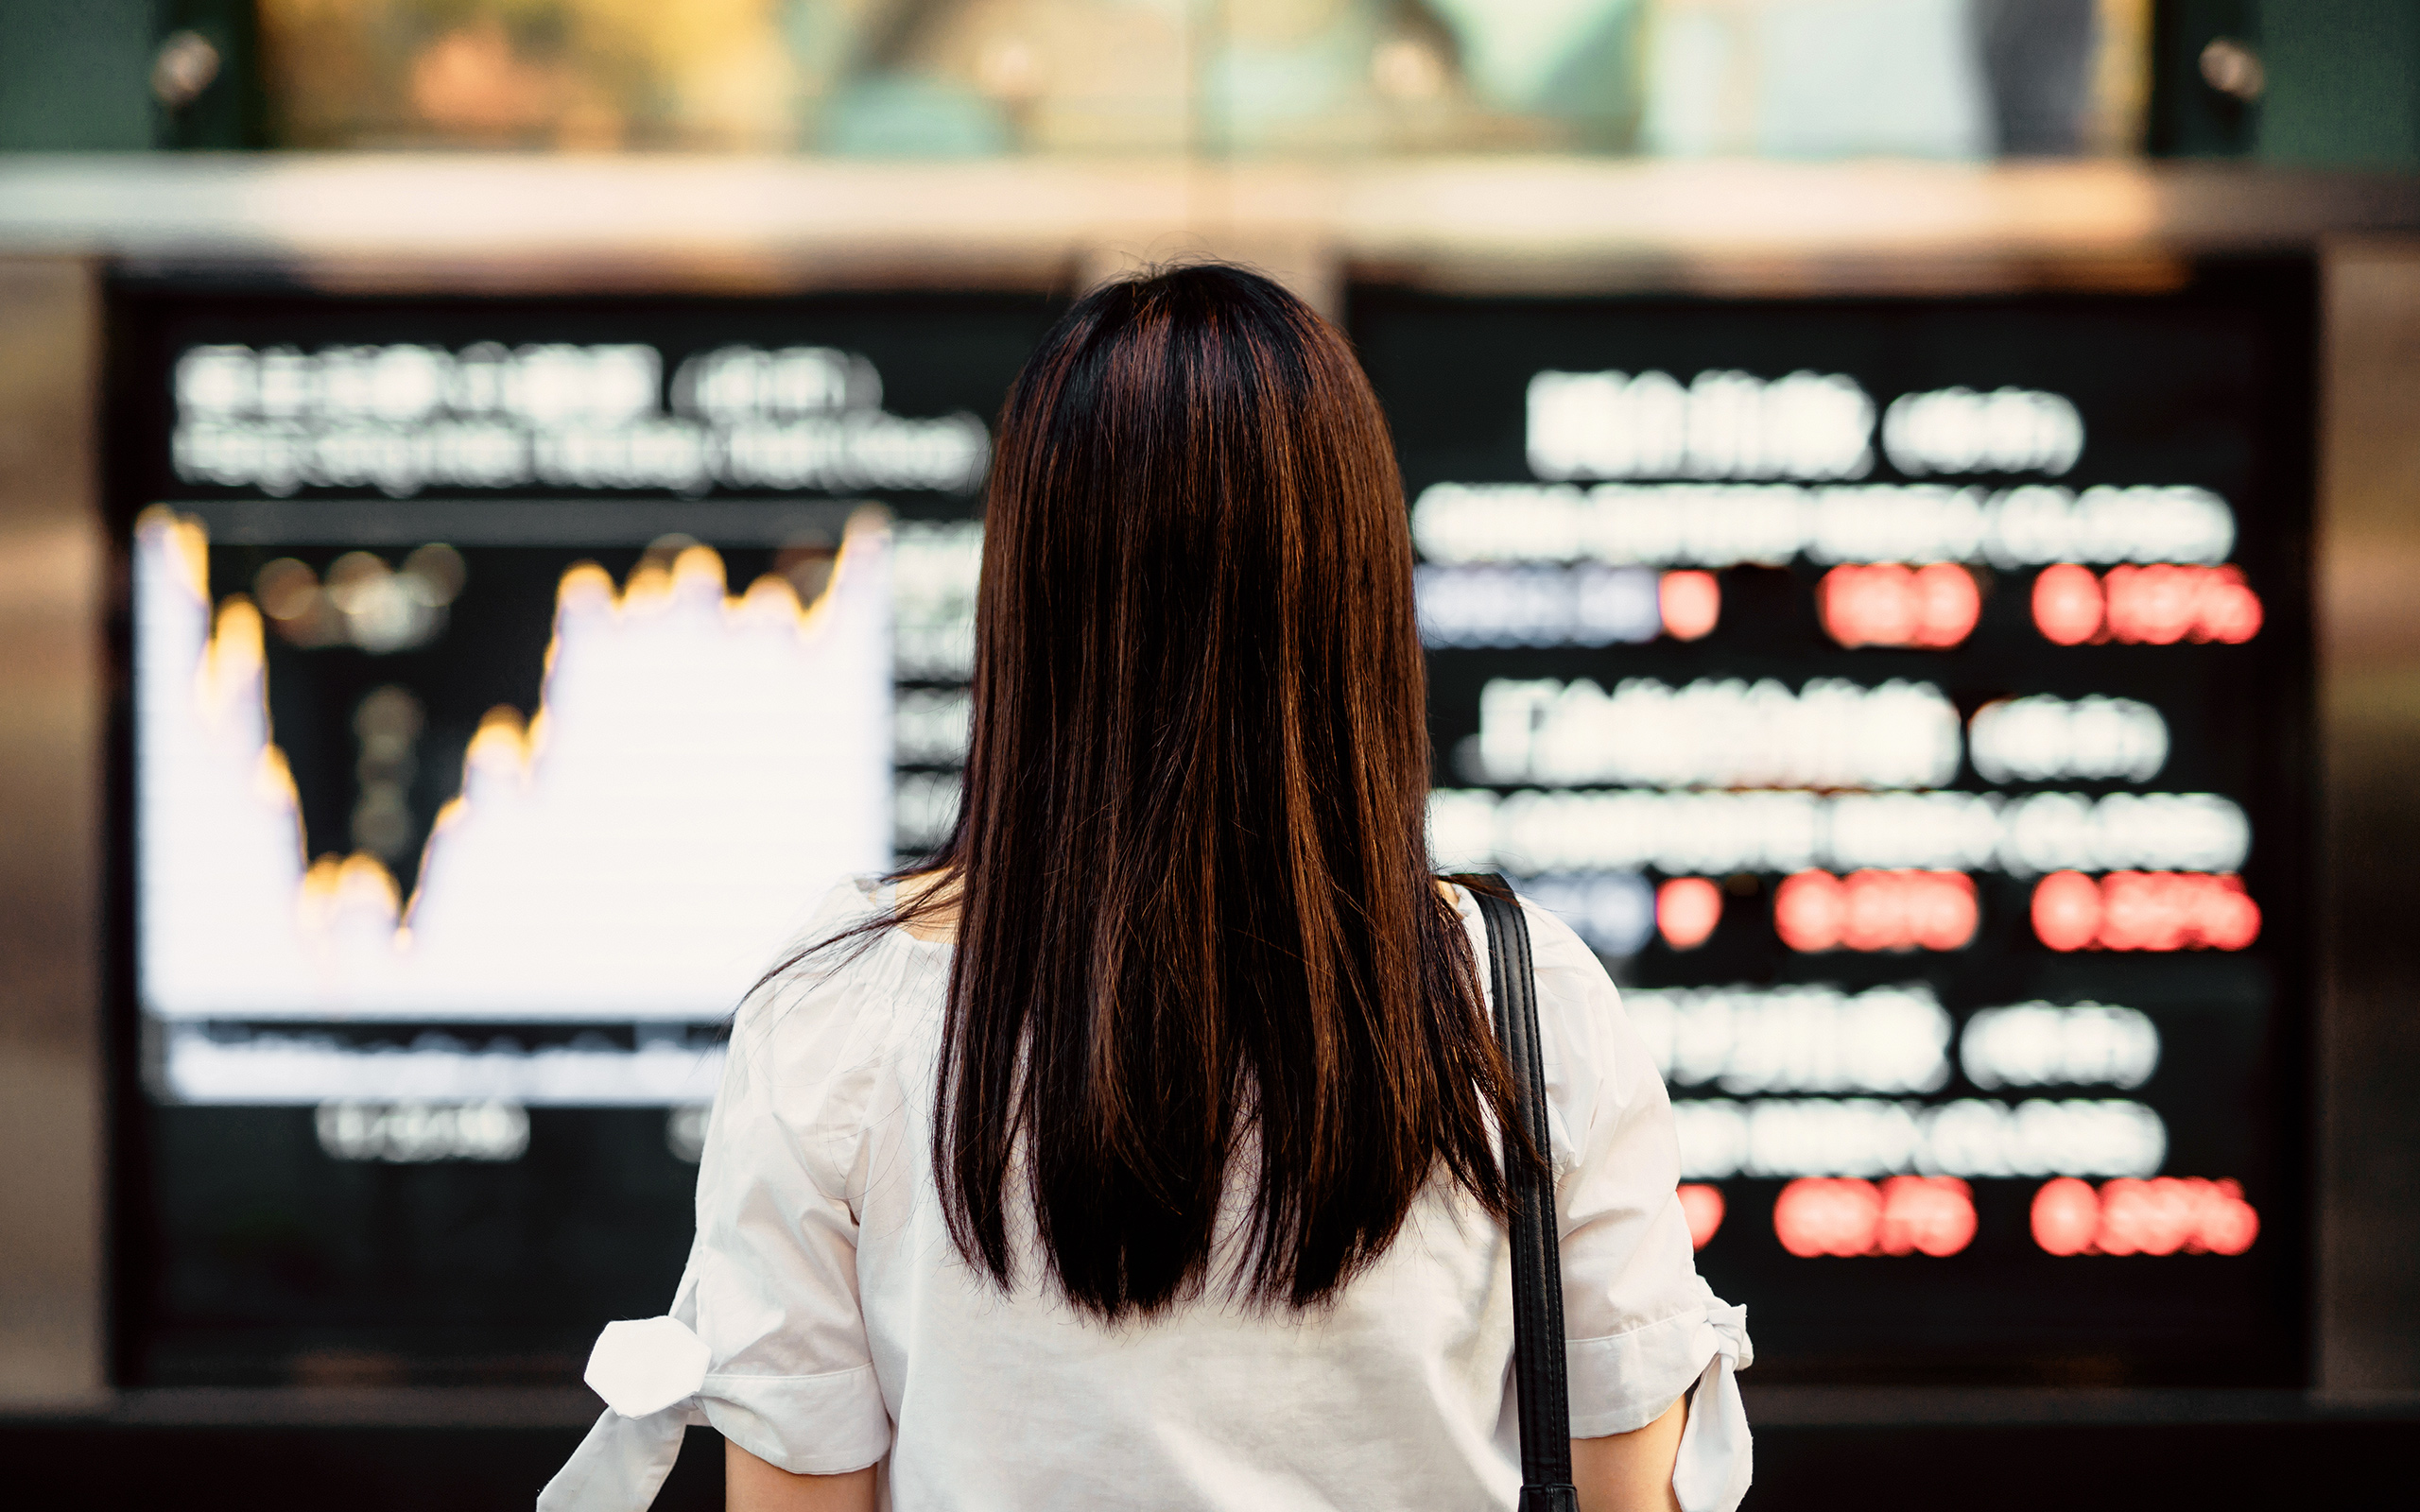 A woman looks at a stock market display board.